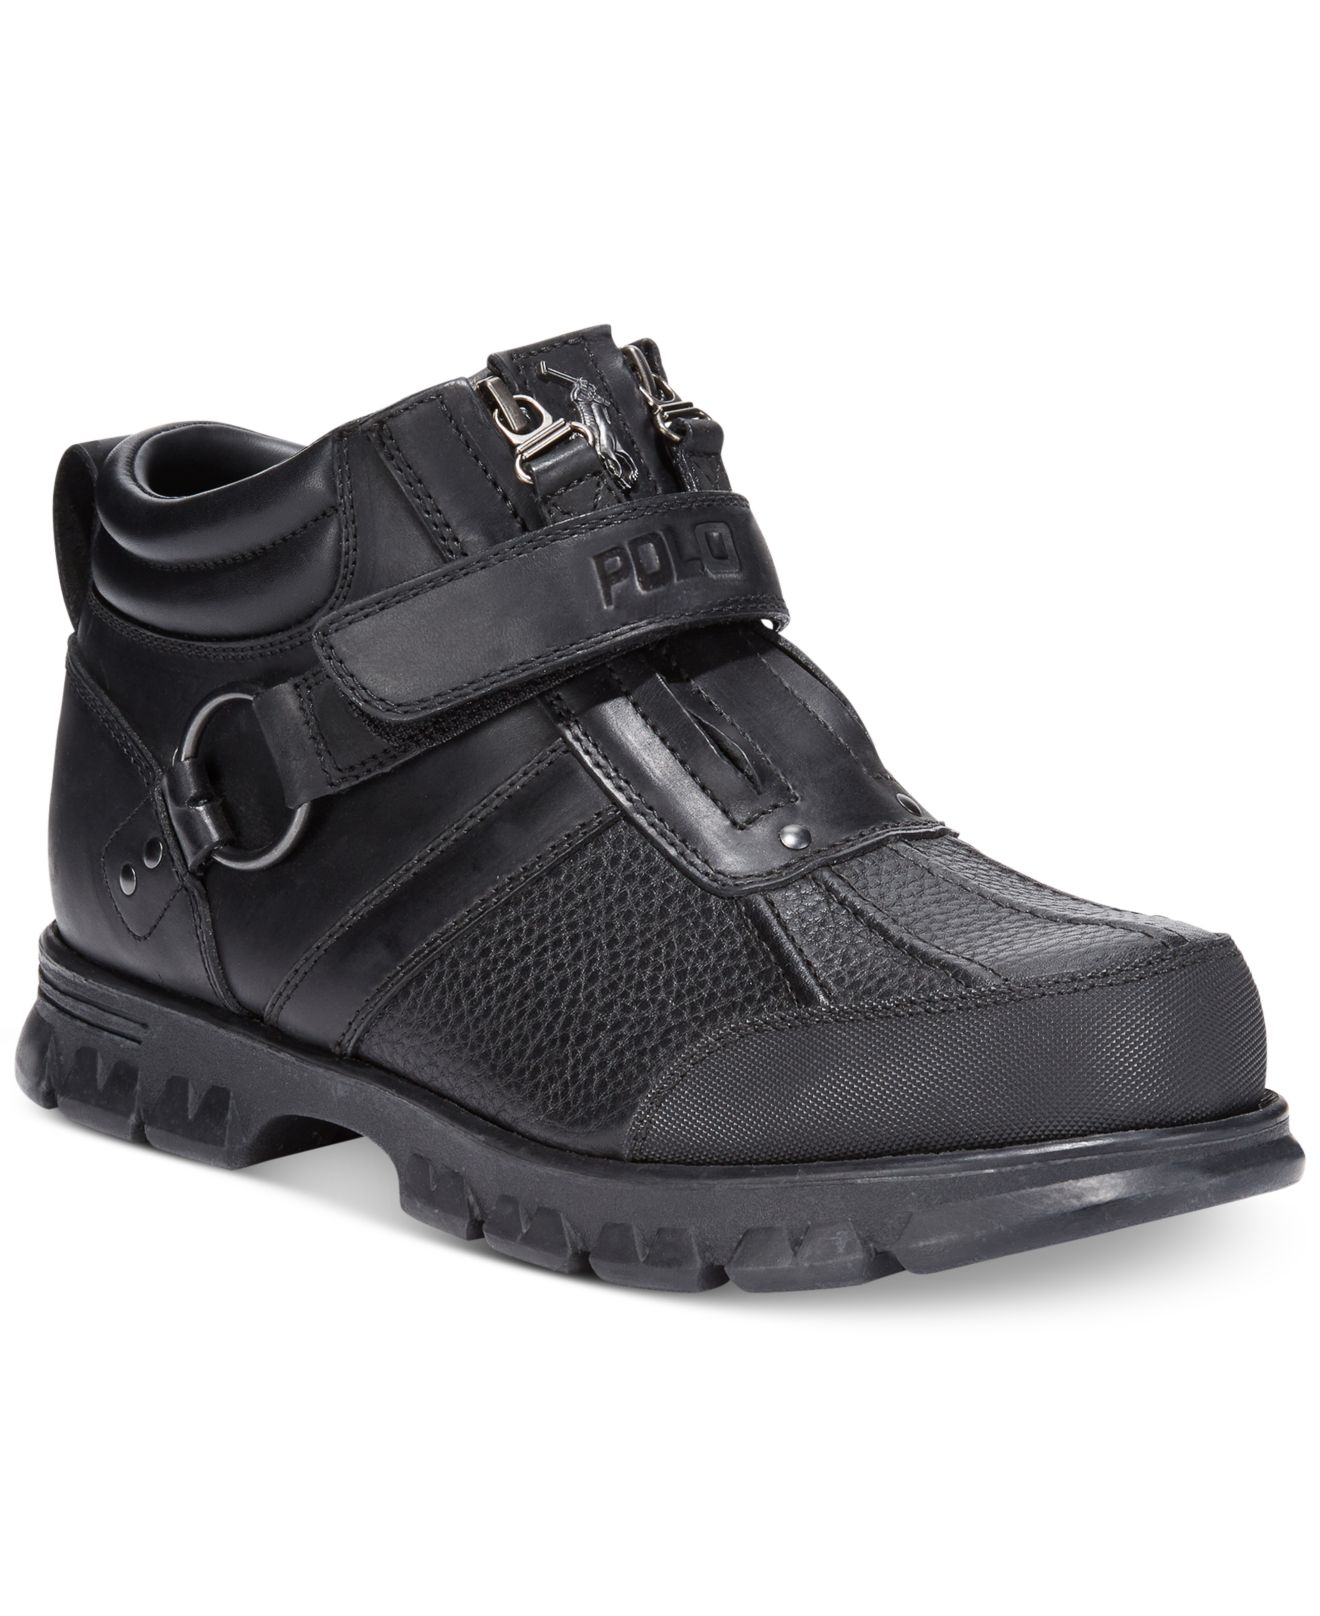 Polo Ralph Lauren Conquest Low Boots in Black for Men - Lyst